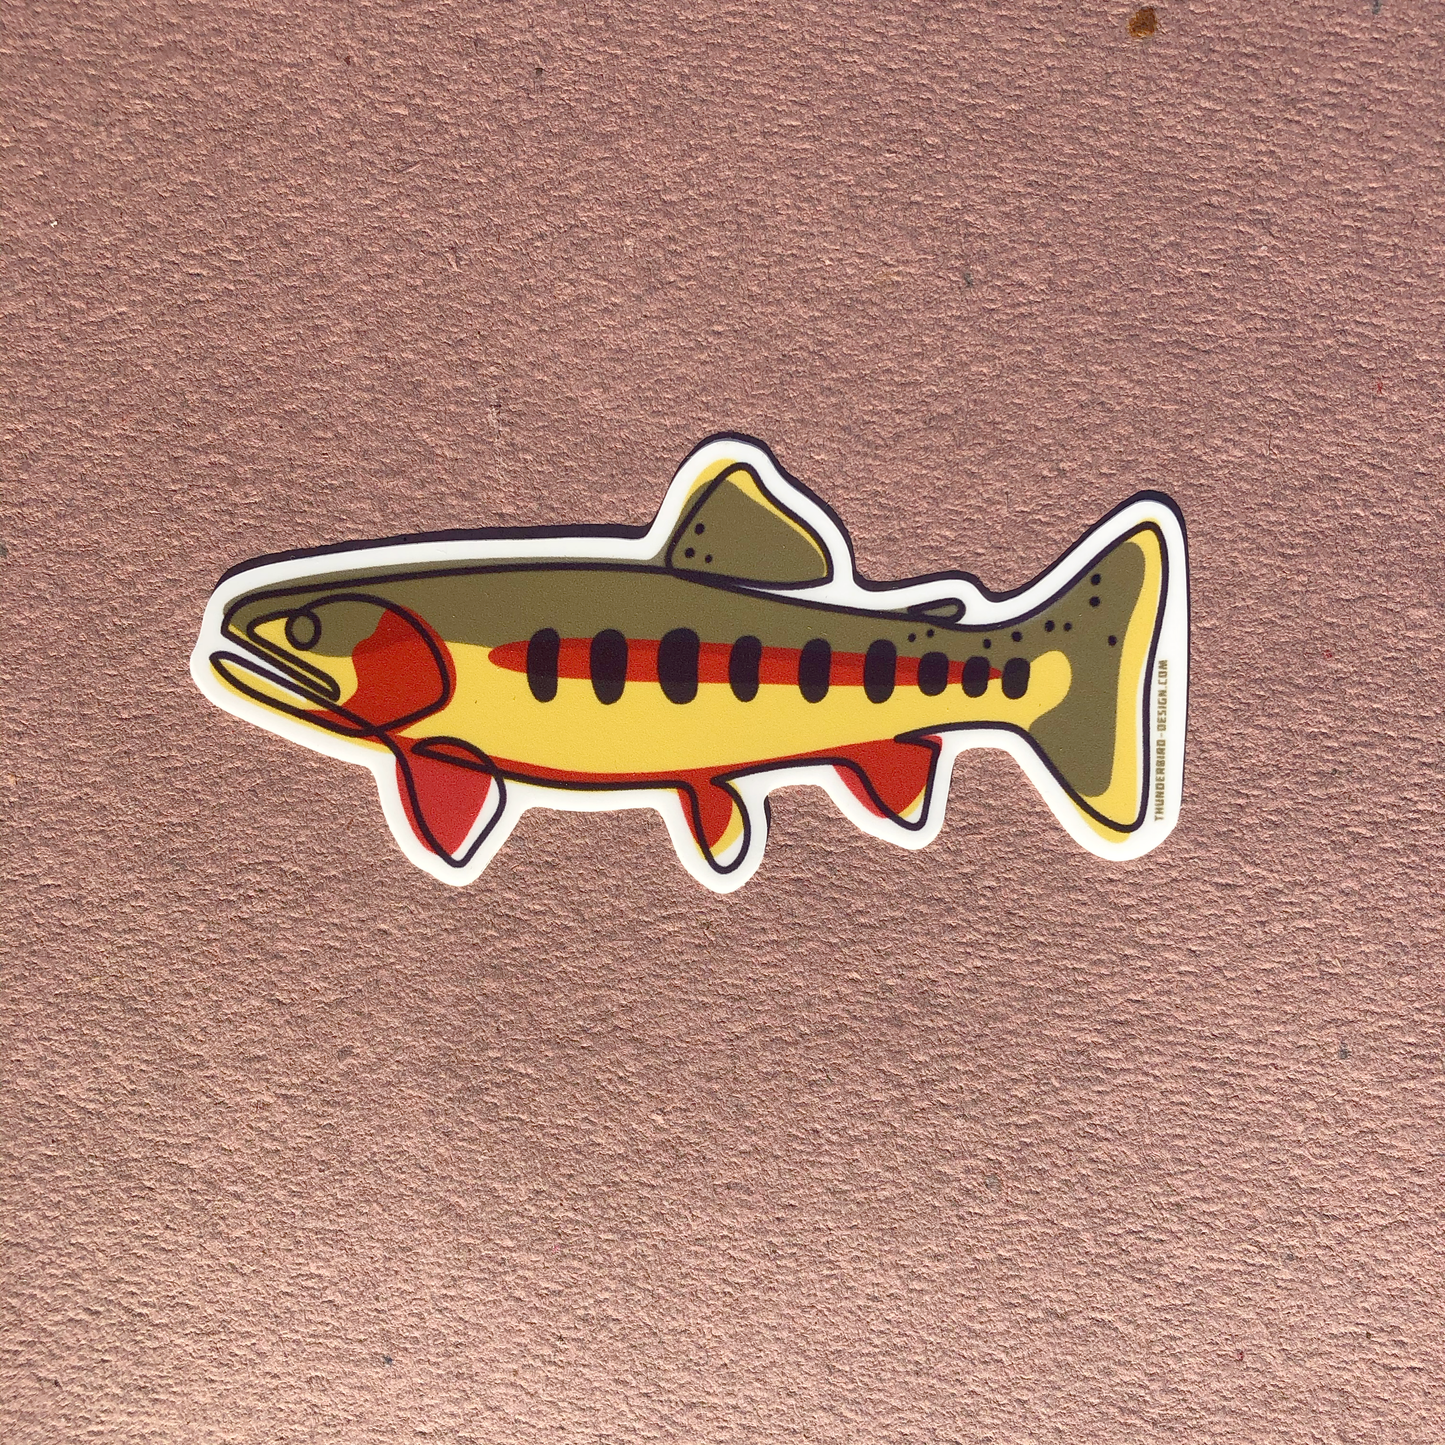 Thunderbird Outdoor SupplyGolden Trout - Single Line Series Decal w/ Matte FinishGolden Trout - Single Line Series Decal
Drawn, Single Line Contour Illustration of a Golden Trout.These 4" weatherproof Matte decals are perfect for your Rod tube, water bottle, tackle box, car window or 